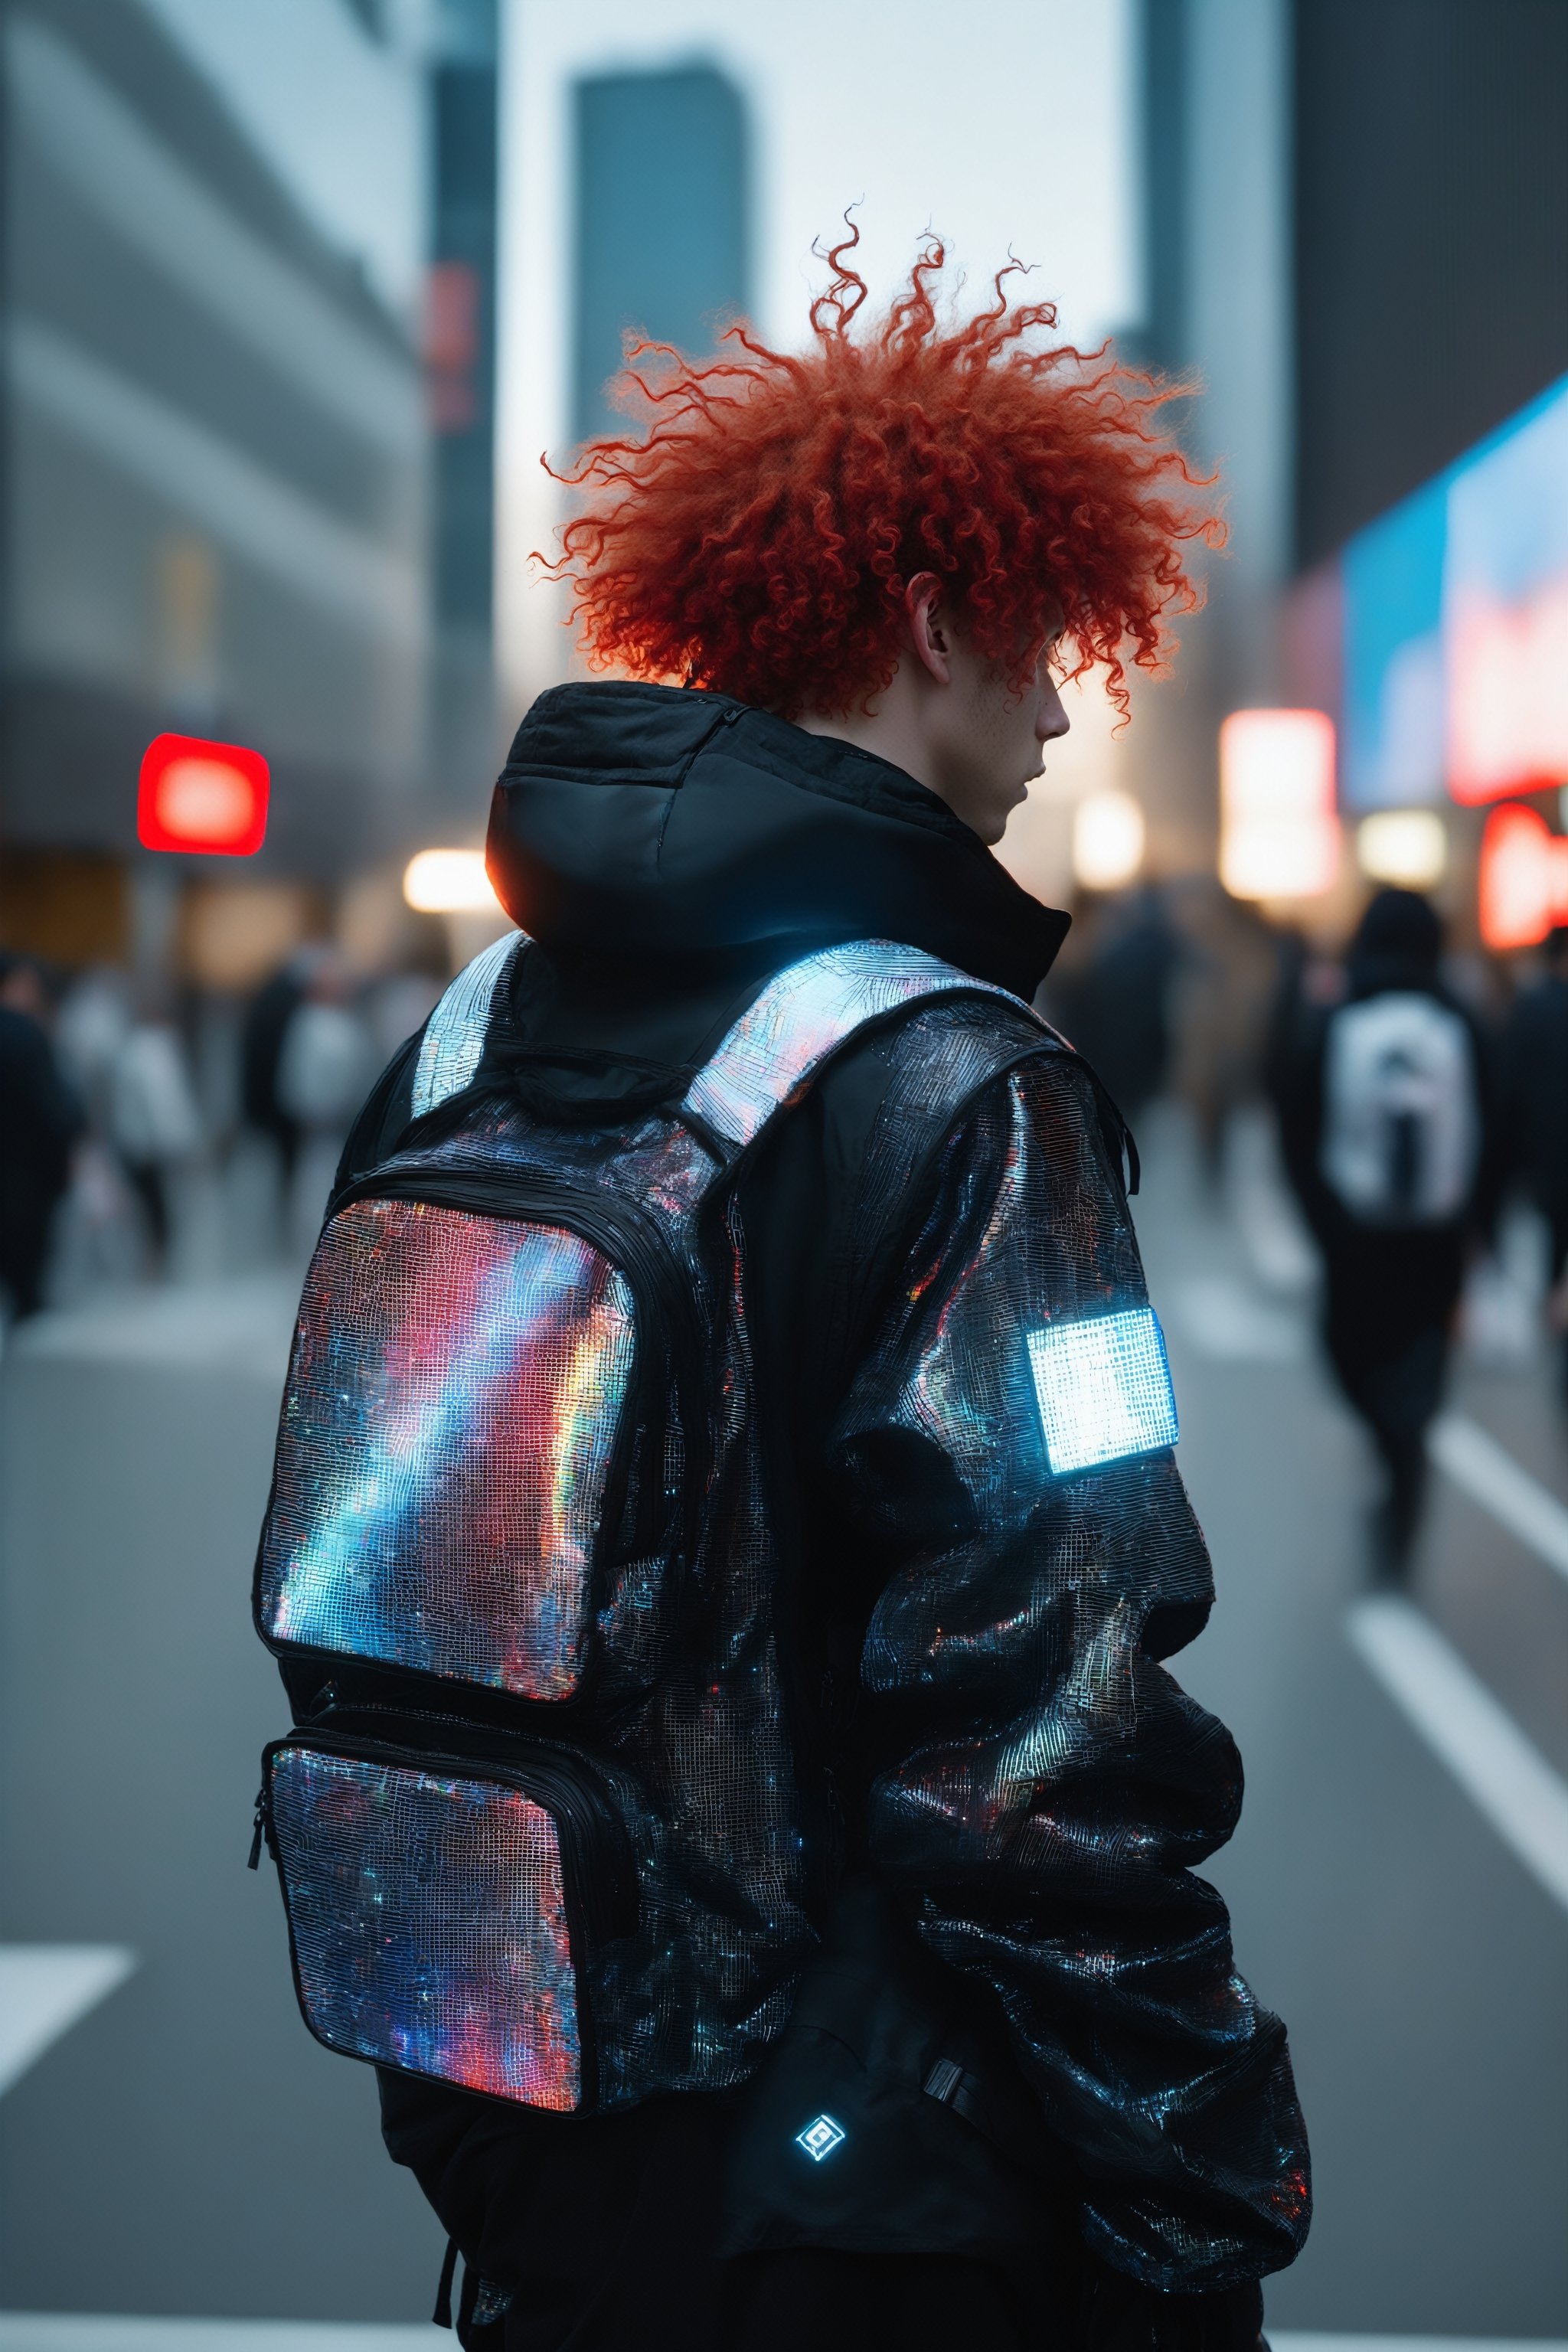 street photography, DOF, Bokeh, techwear, black holographic streetwear fashion statement, white male, red curly hair, seen from back
,DonMT3chW0rldXL